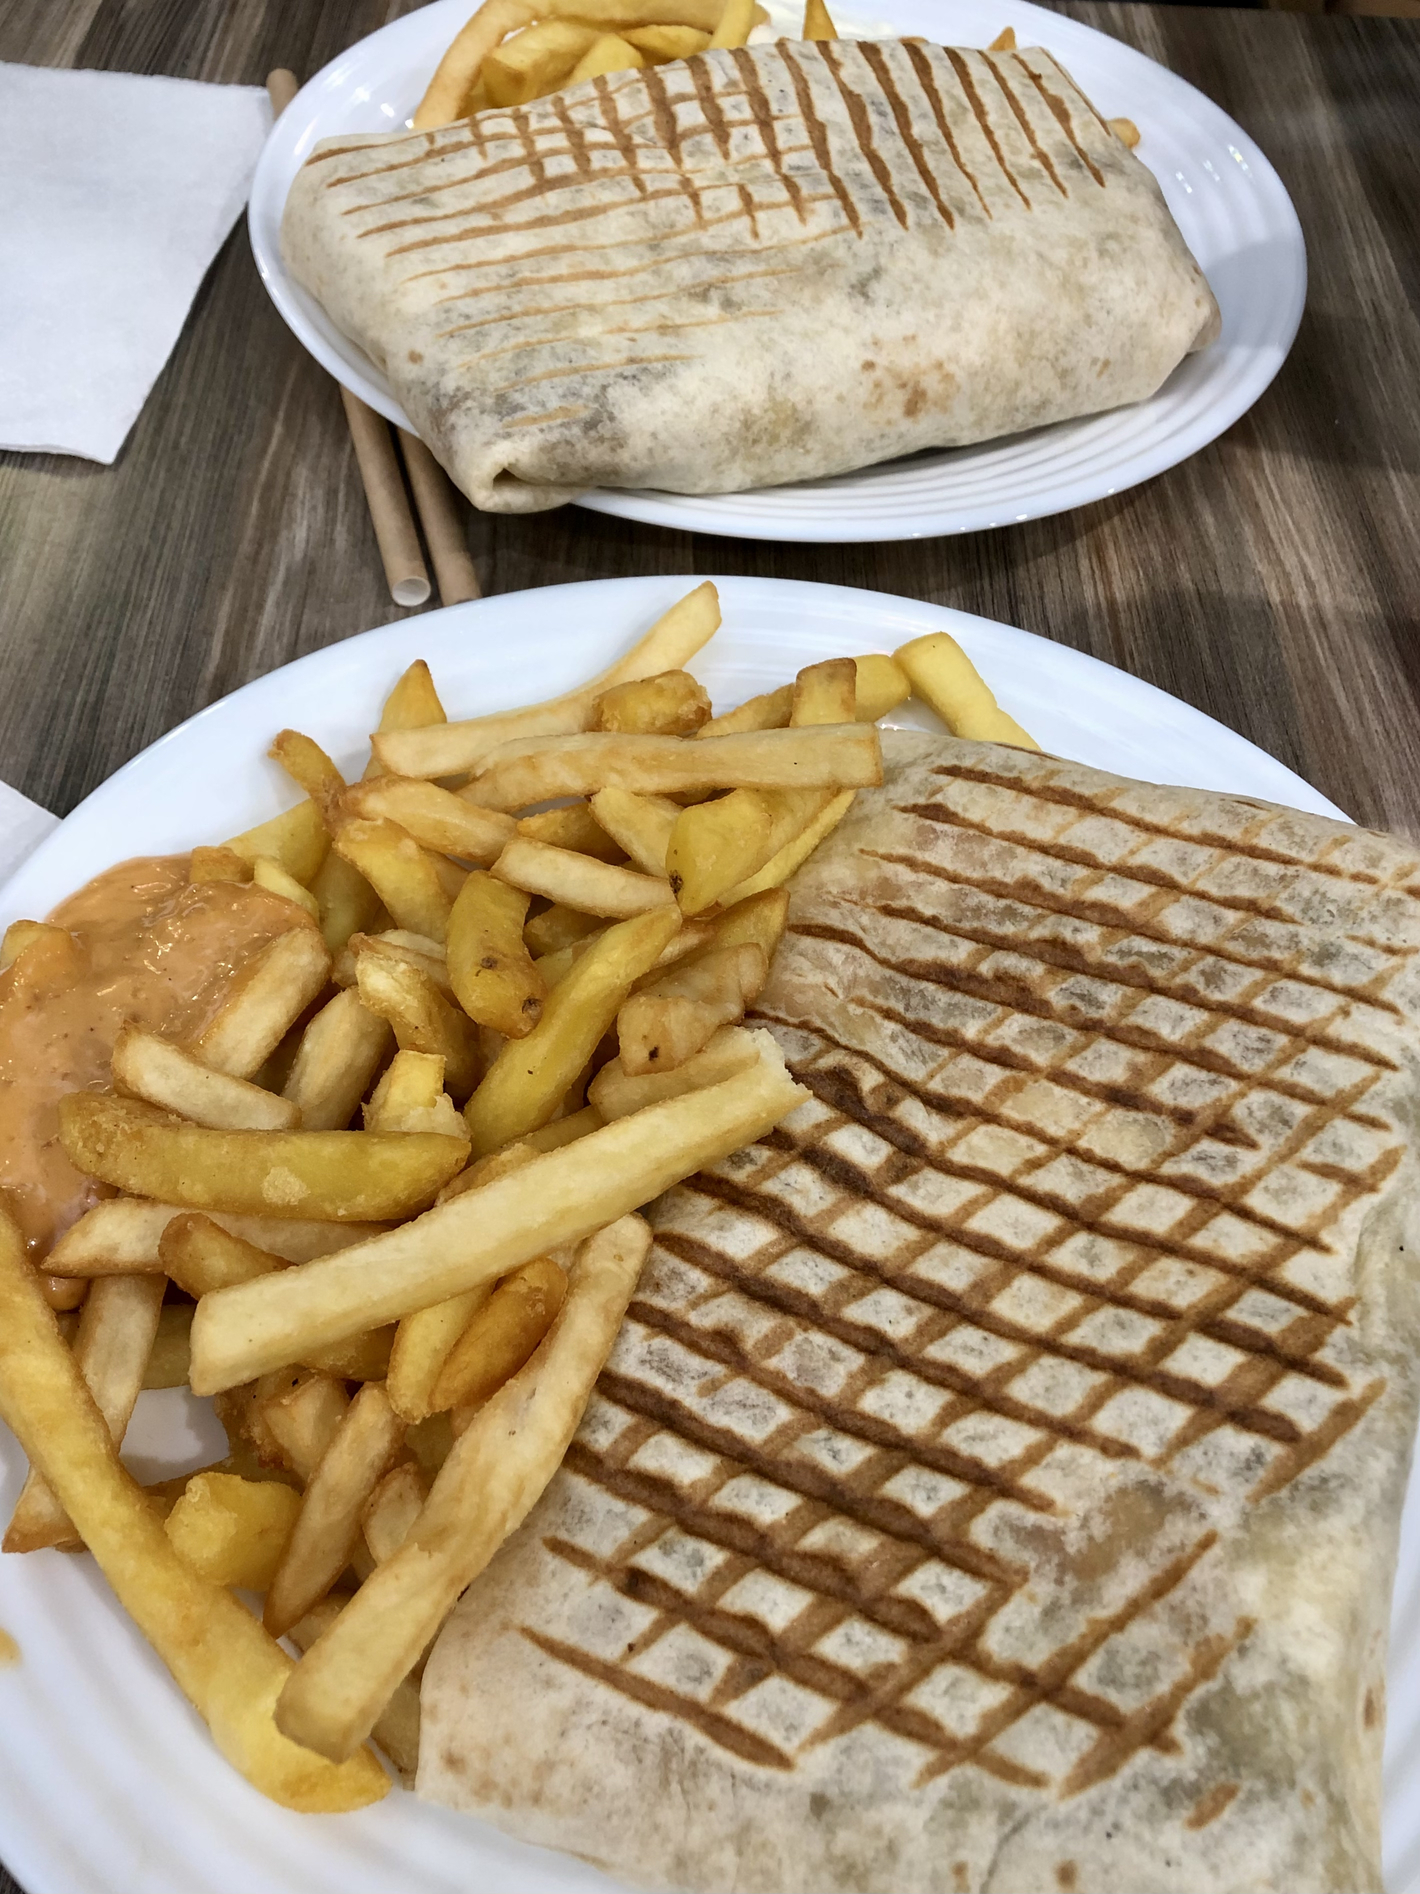 Two French tacos from l'Istanbul in Reims, France.